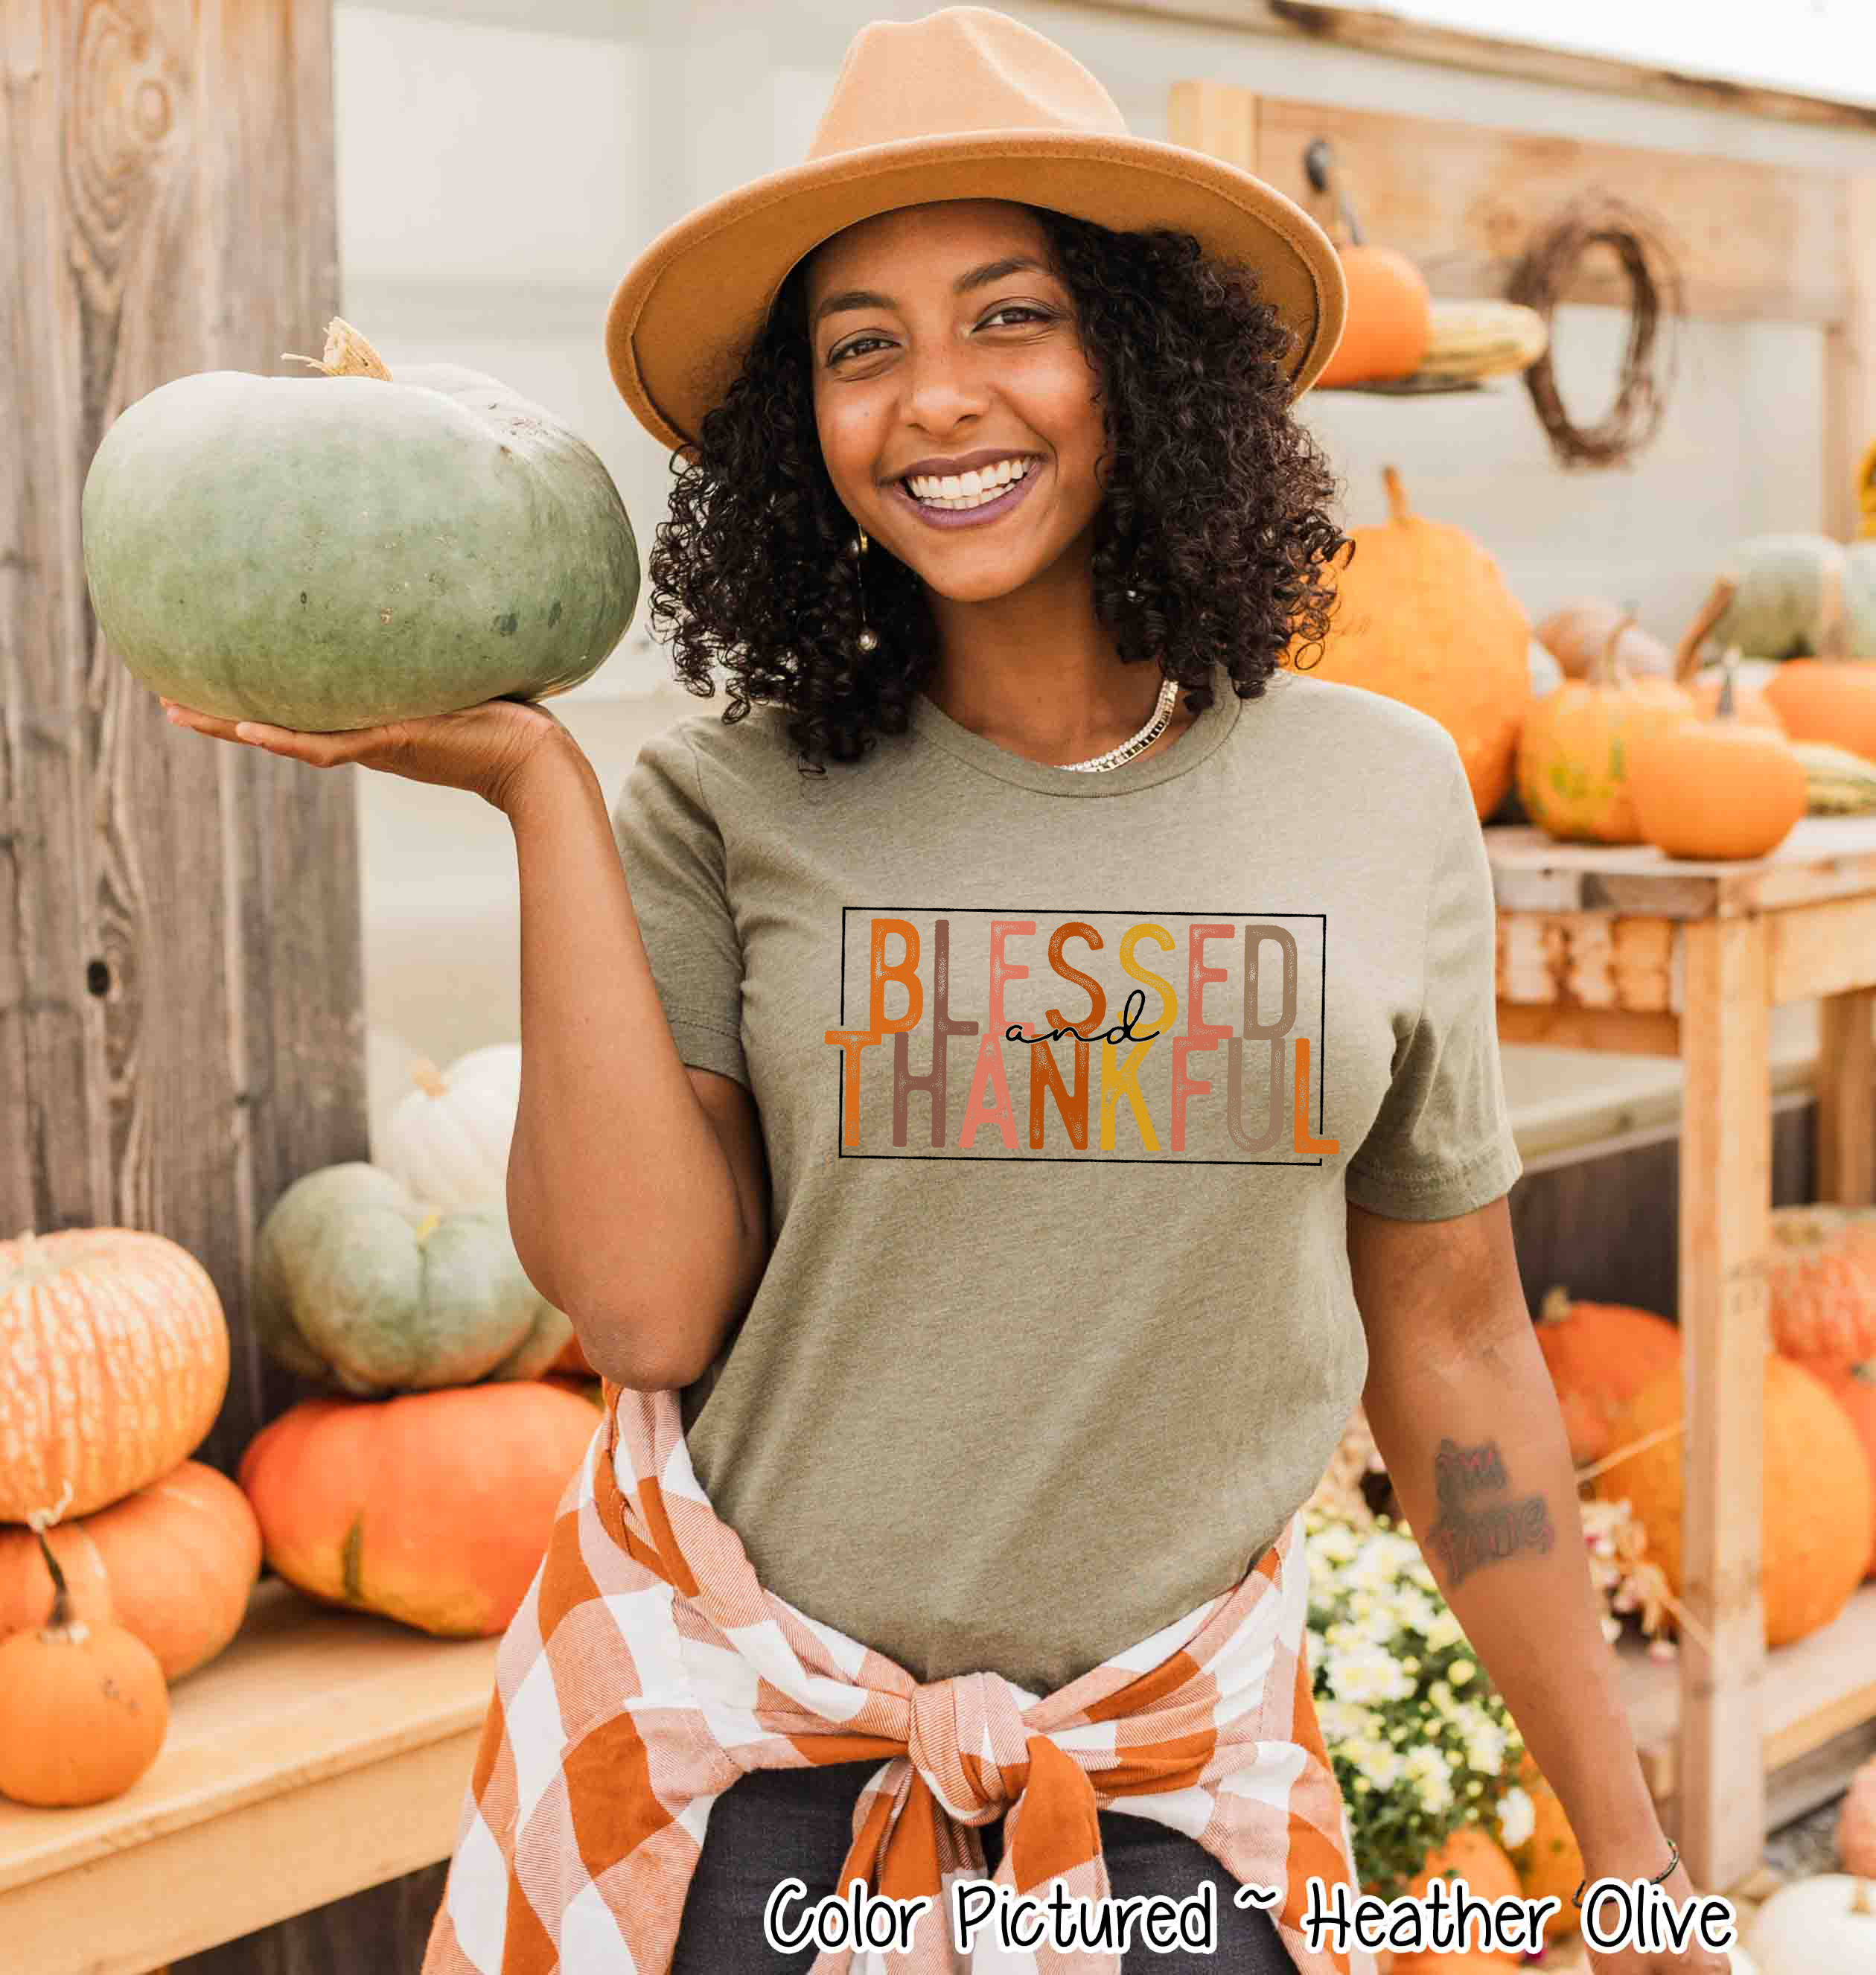 Blessed & Thankful Fall Tee